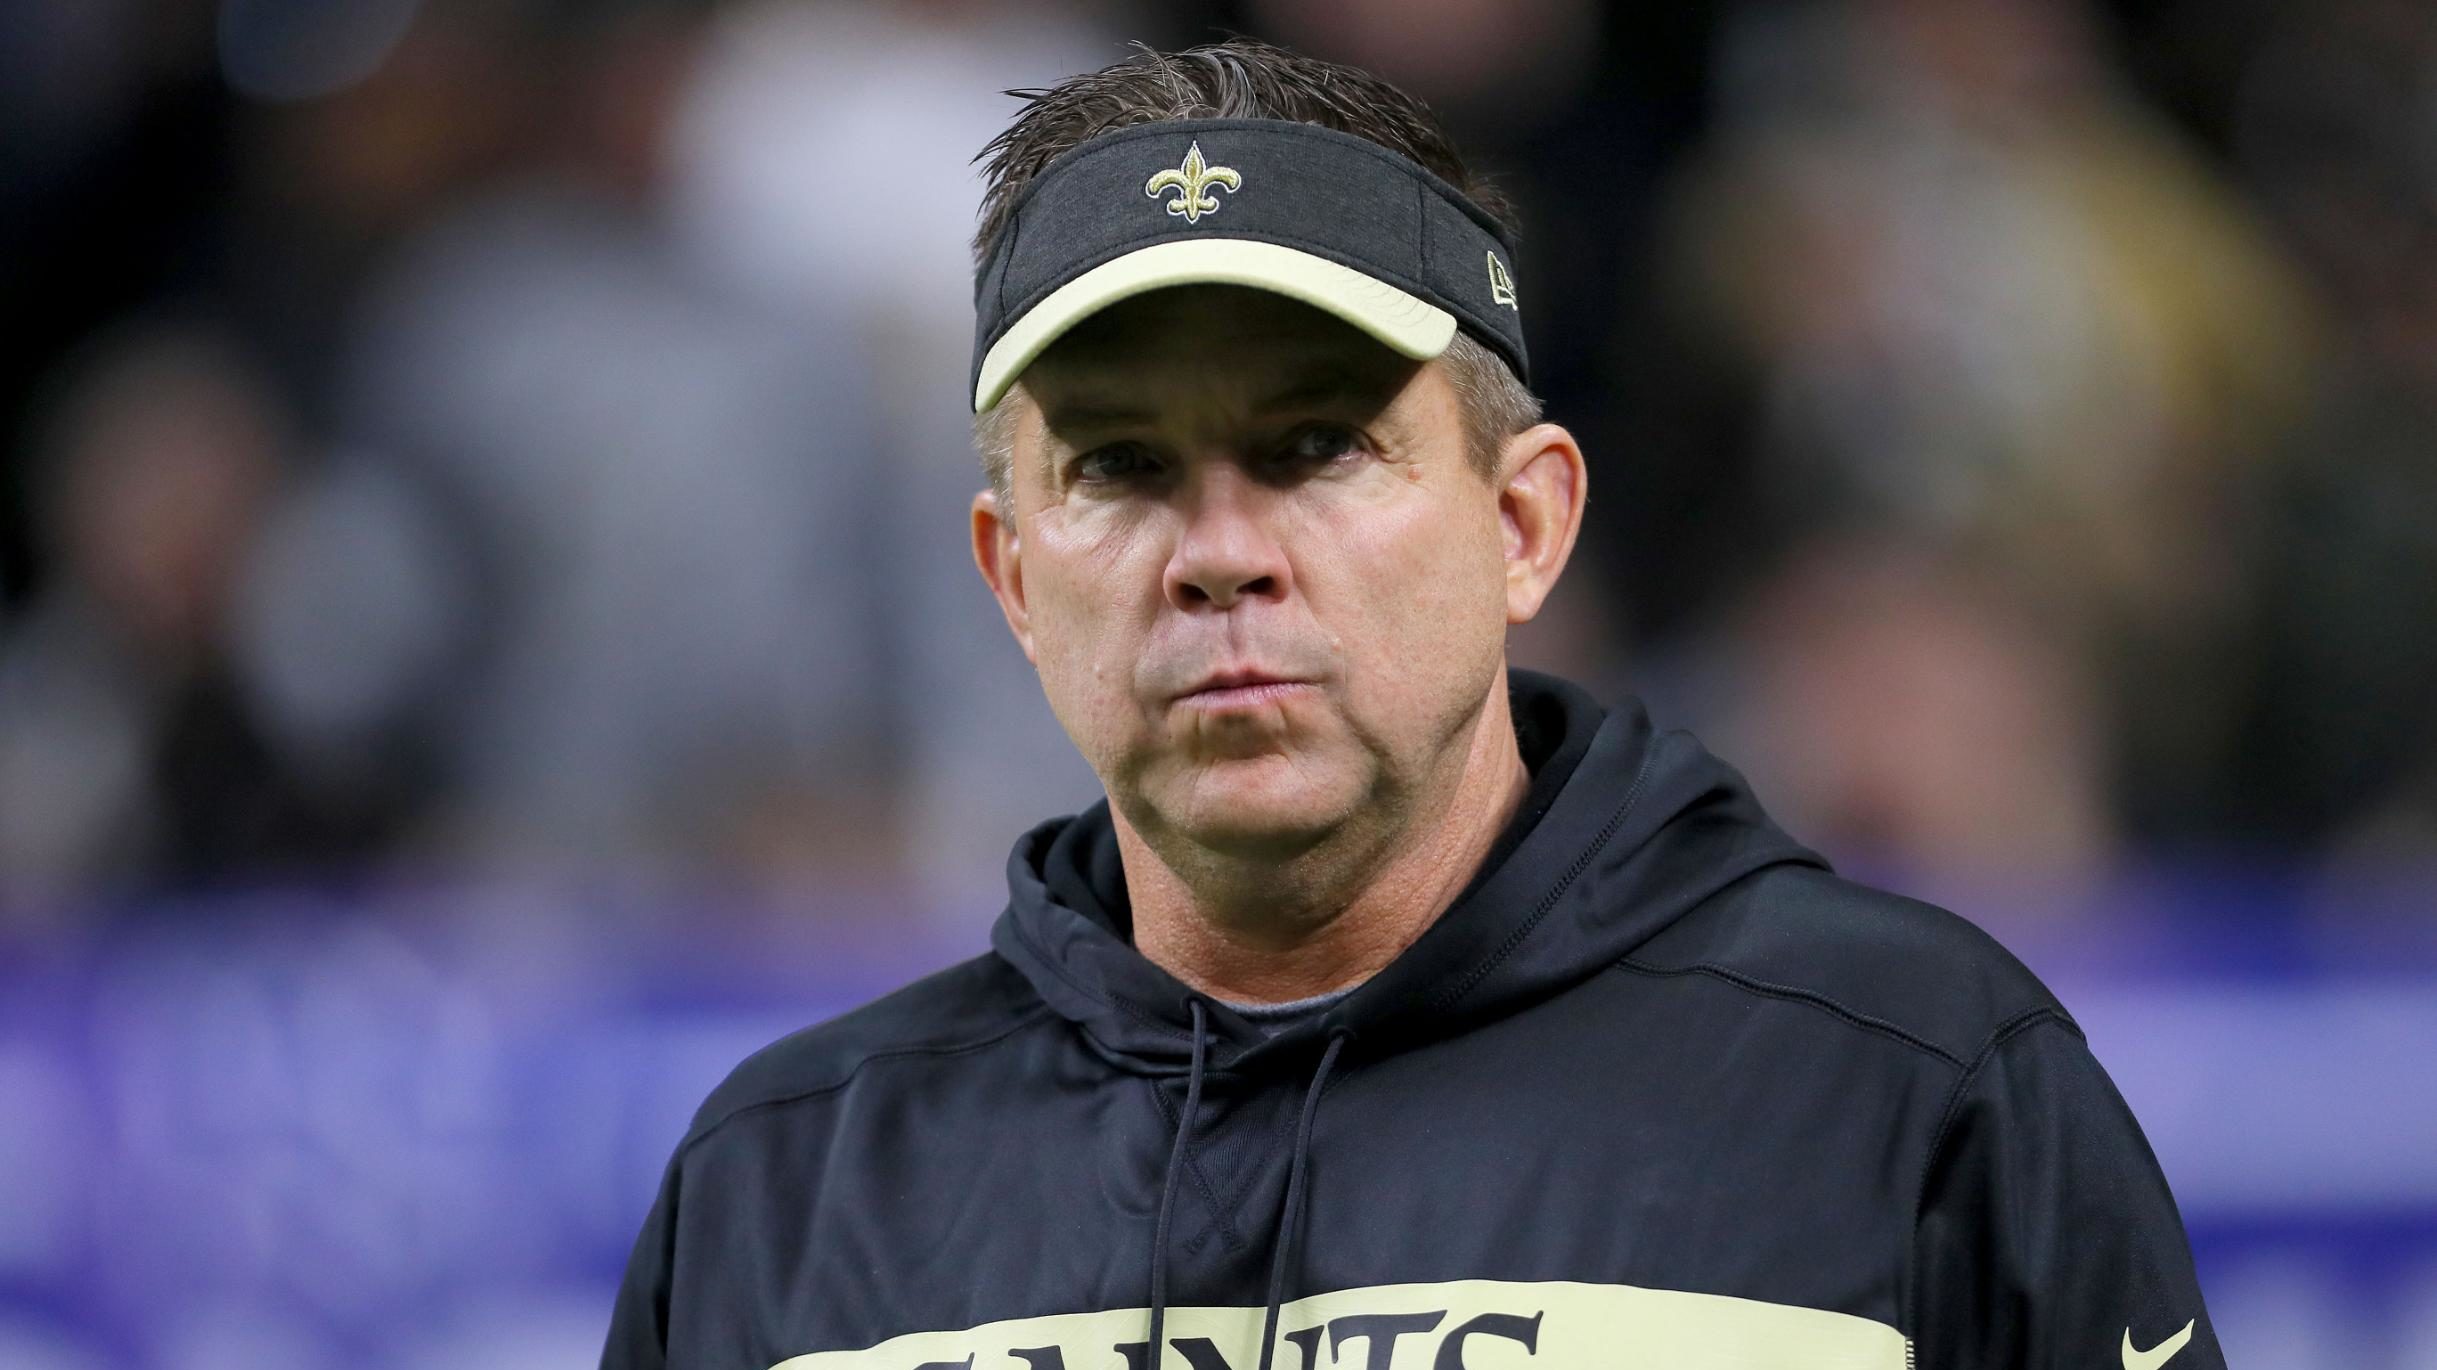 FILE: Sean Payton led the New Orleans Saints to an emotional Super Bowl win in the years after Hurr...